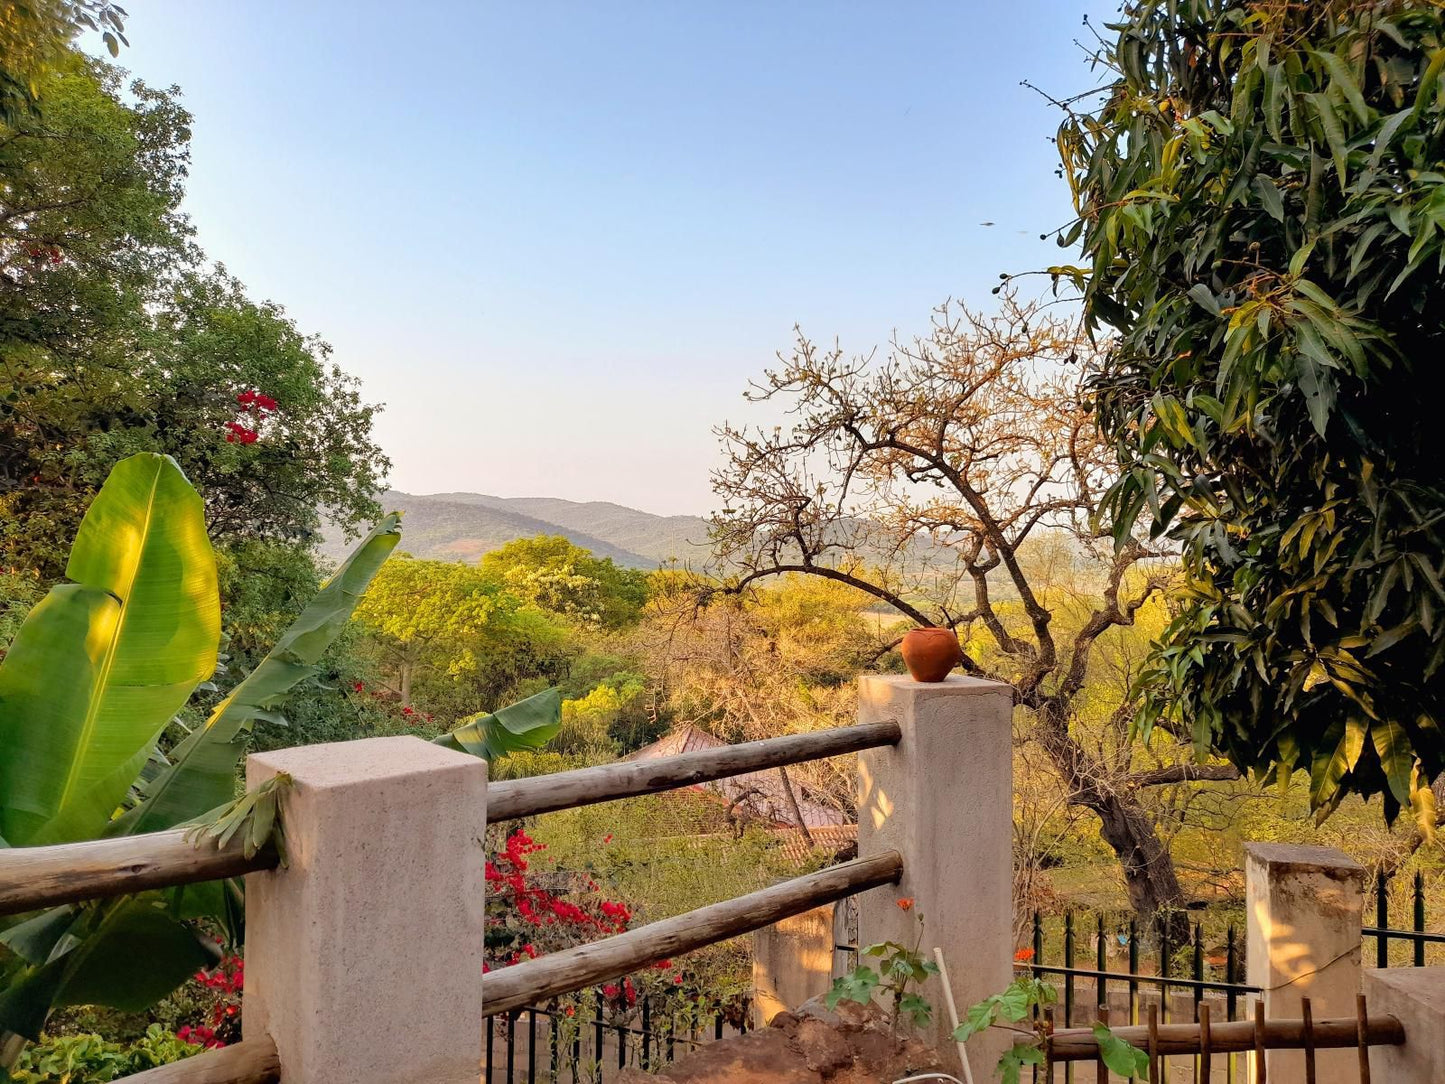 The Healing Hill Guesthouse Hazyview Mpumalanga South Africa Complementary Colors, Cactus, Plant, Nature, Garden